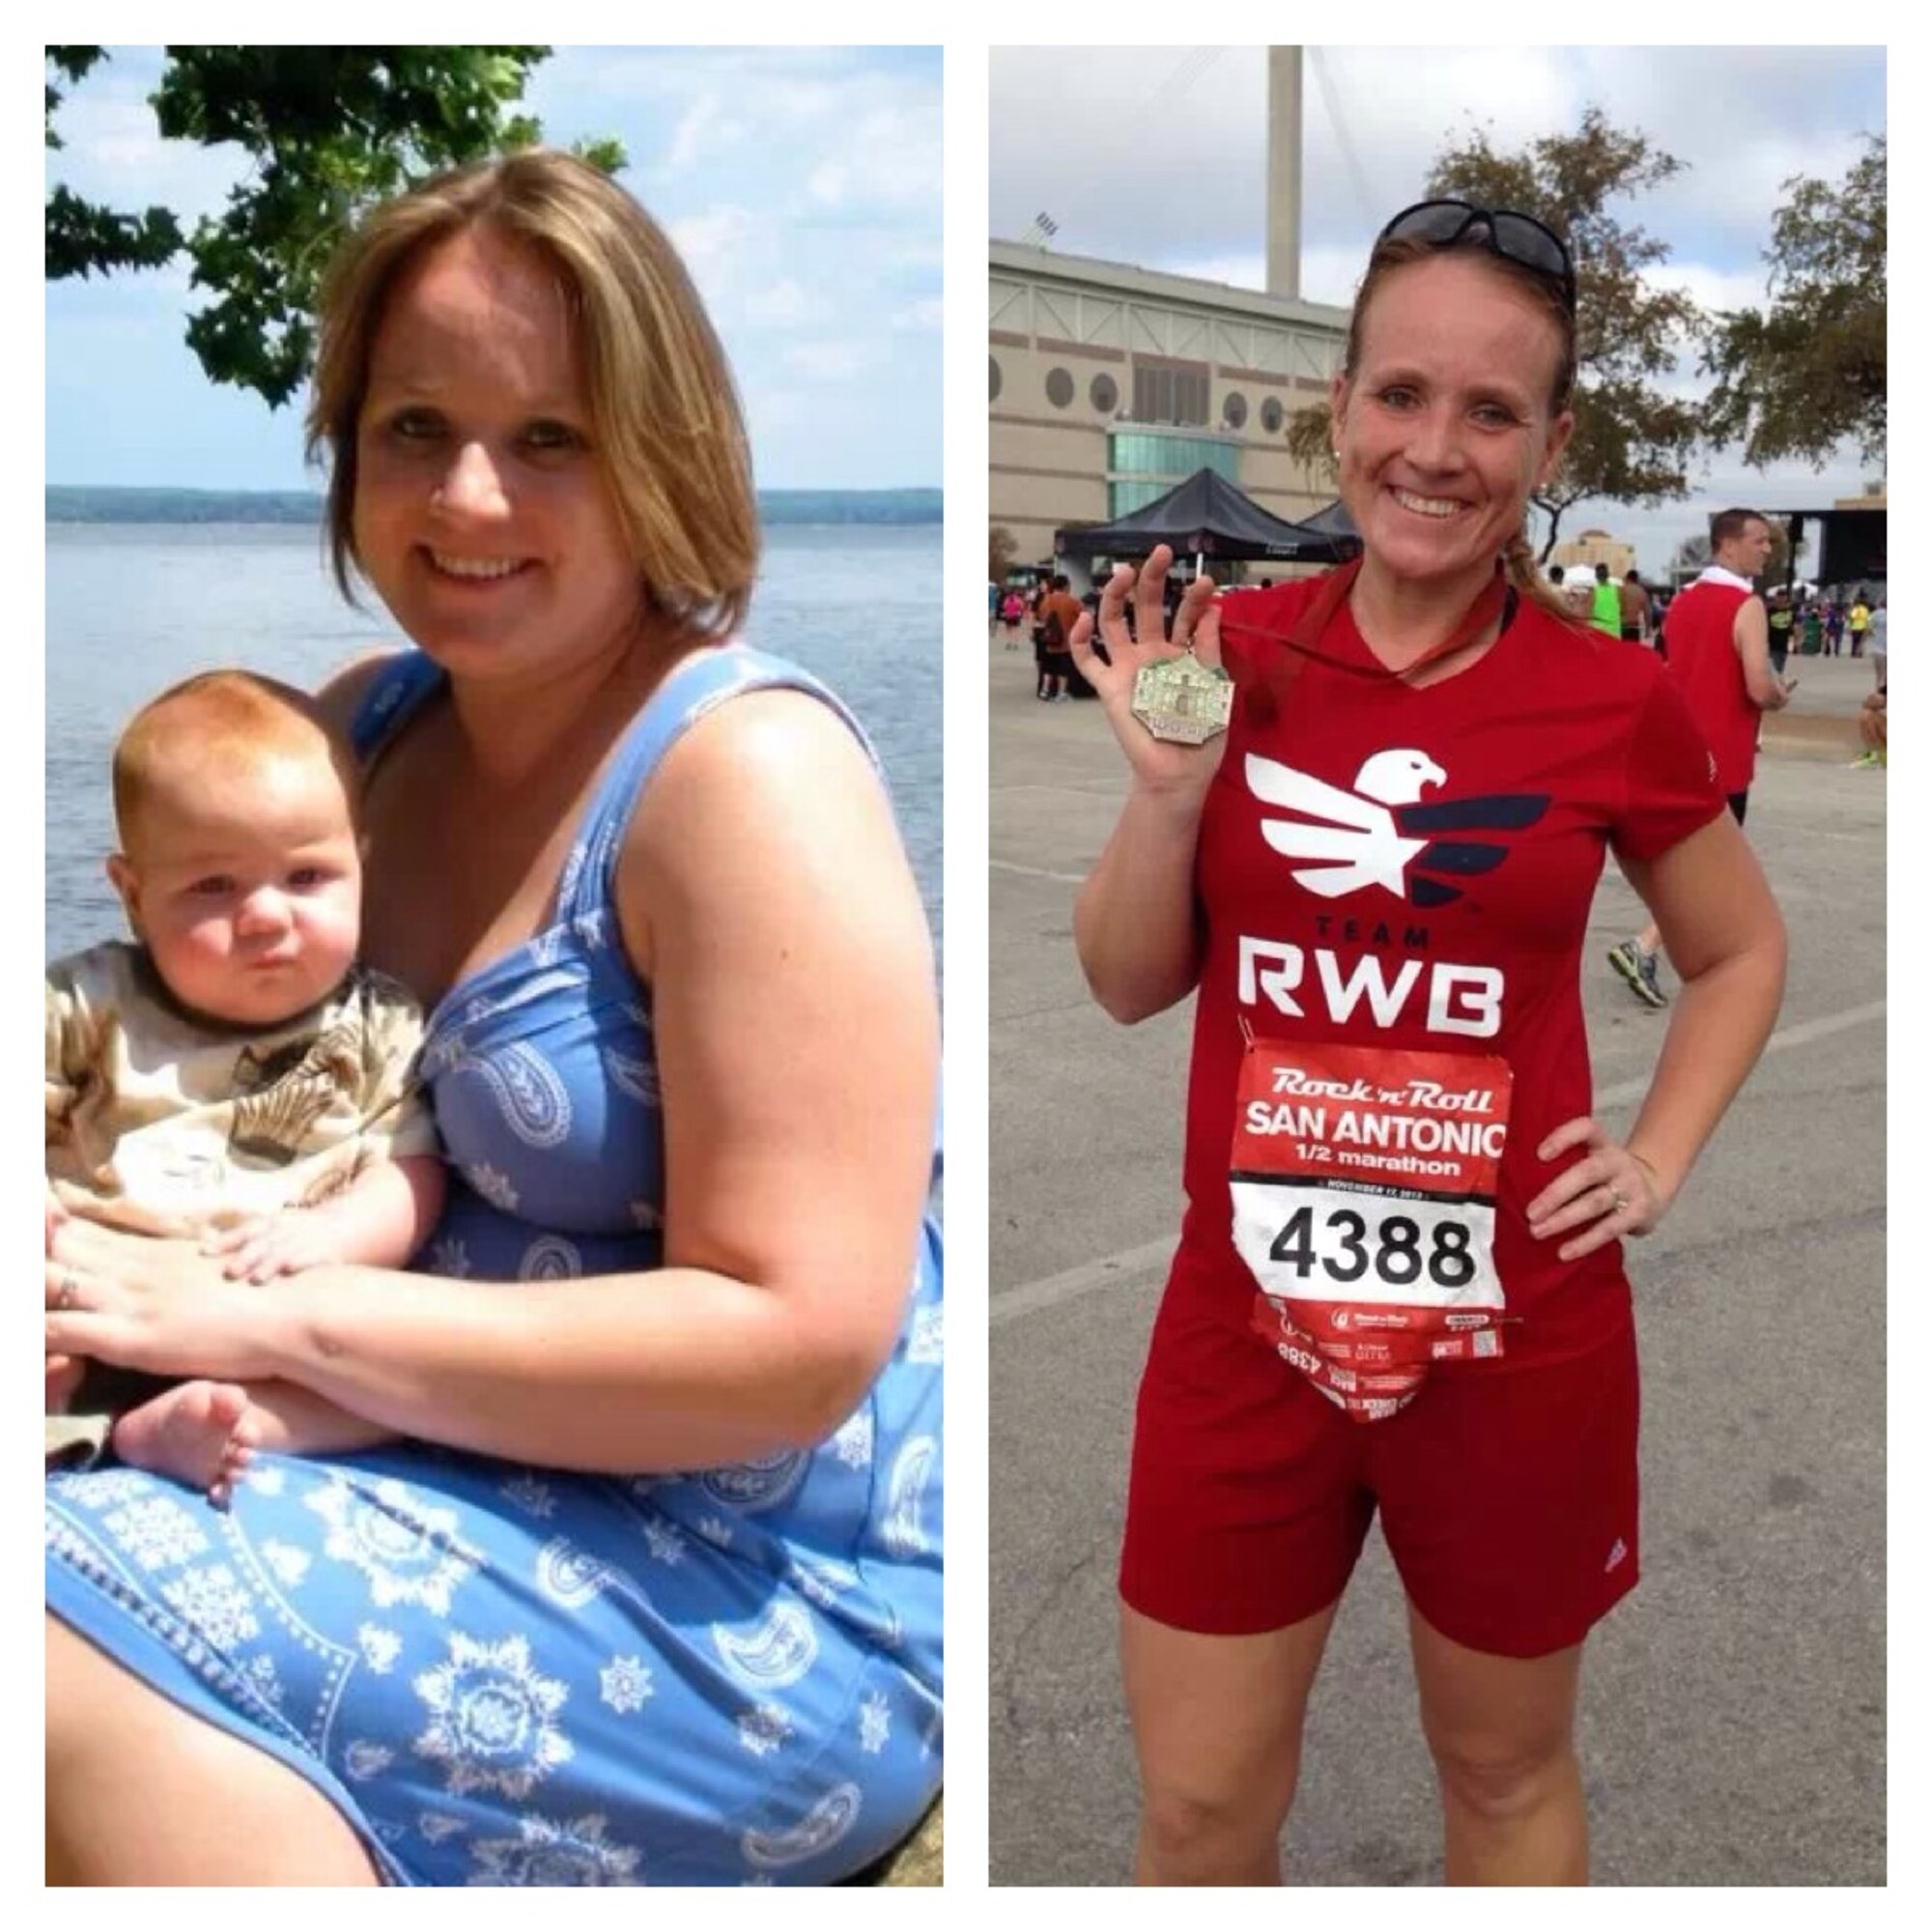 A before and after photo of Master Sgt. April Lapetoda, who lost 100 pounds and has since completed a marathon and several half marathons. (Courtesy photo)
